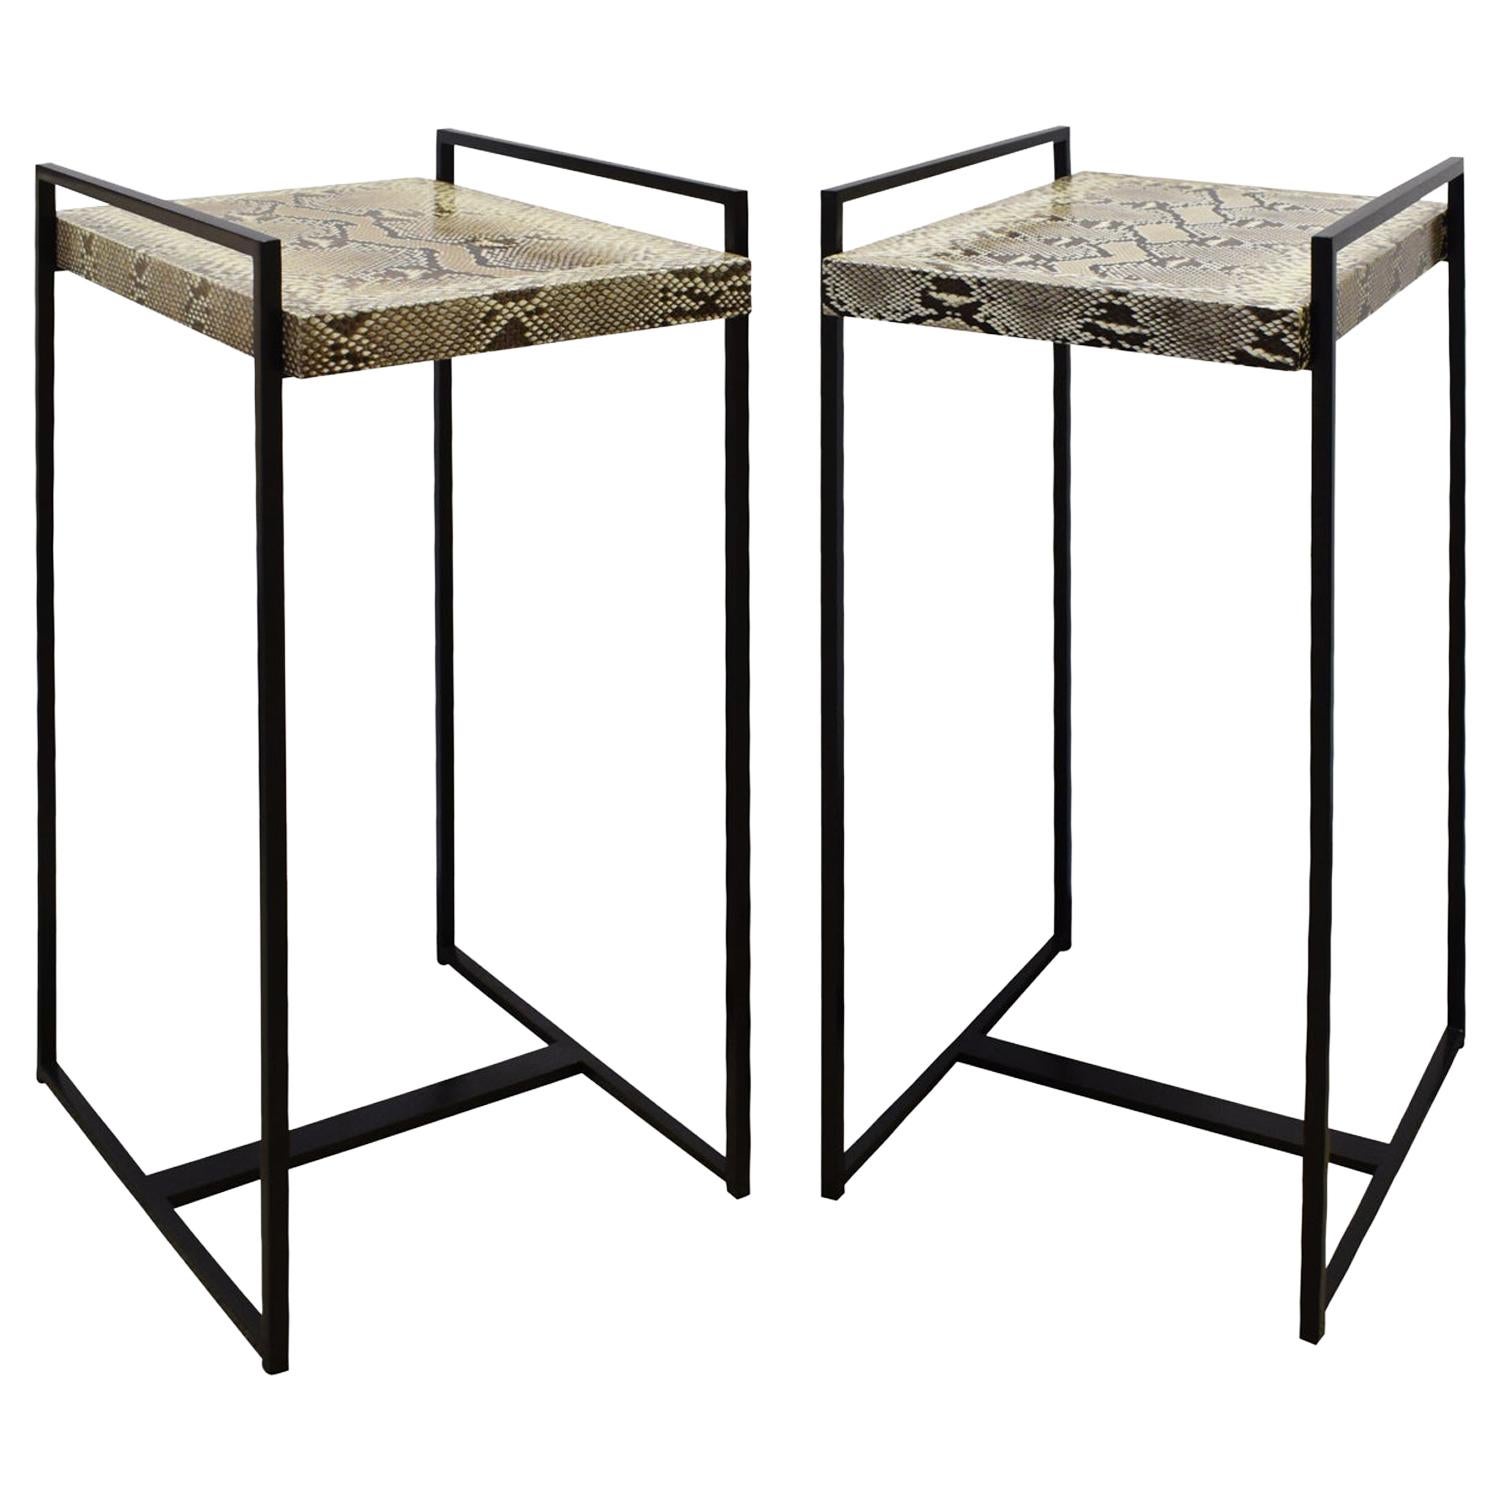 Karl Springer Pair of Rare "Anna" Side Tables with Python Tops 1994 'Signed'